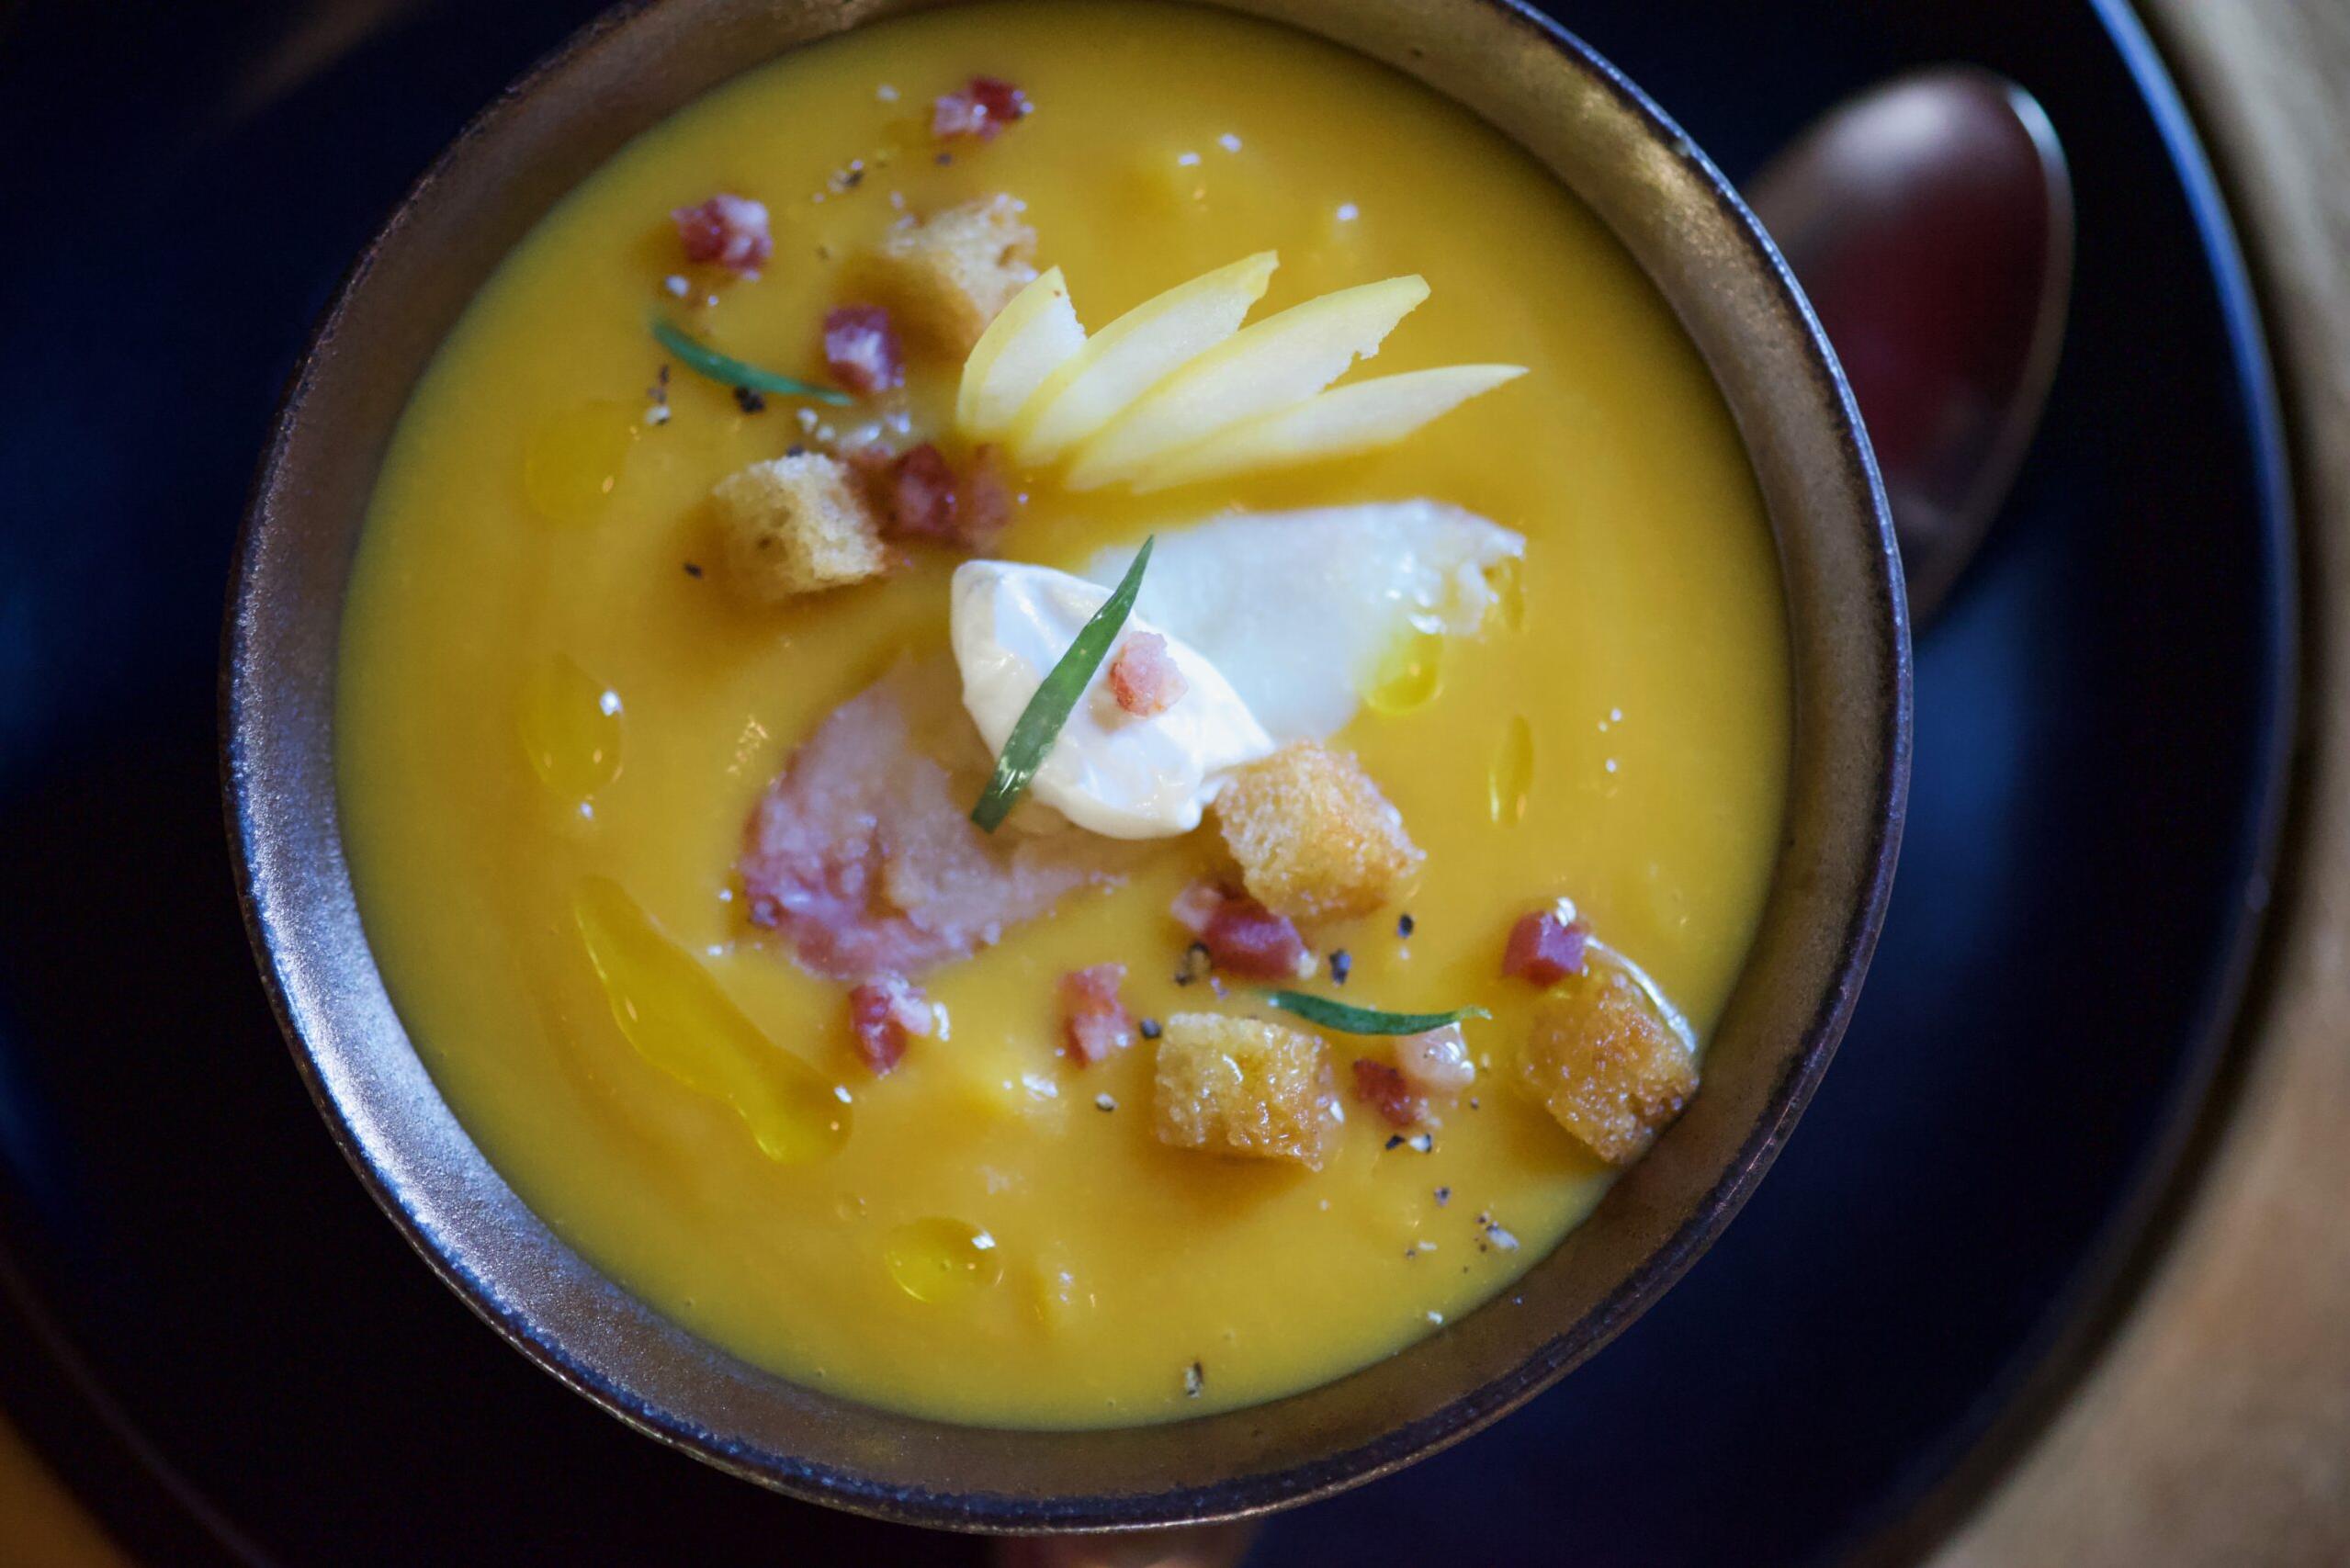  Impress your dinner guests with this unique and flavorful soup